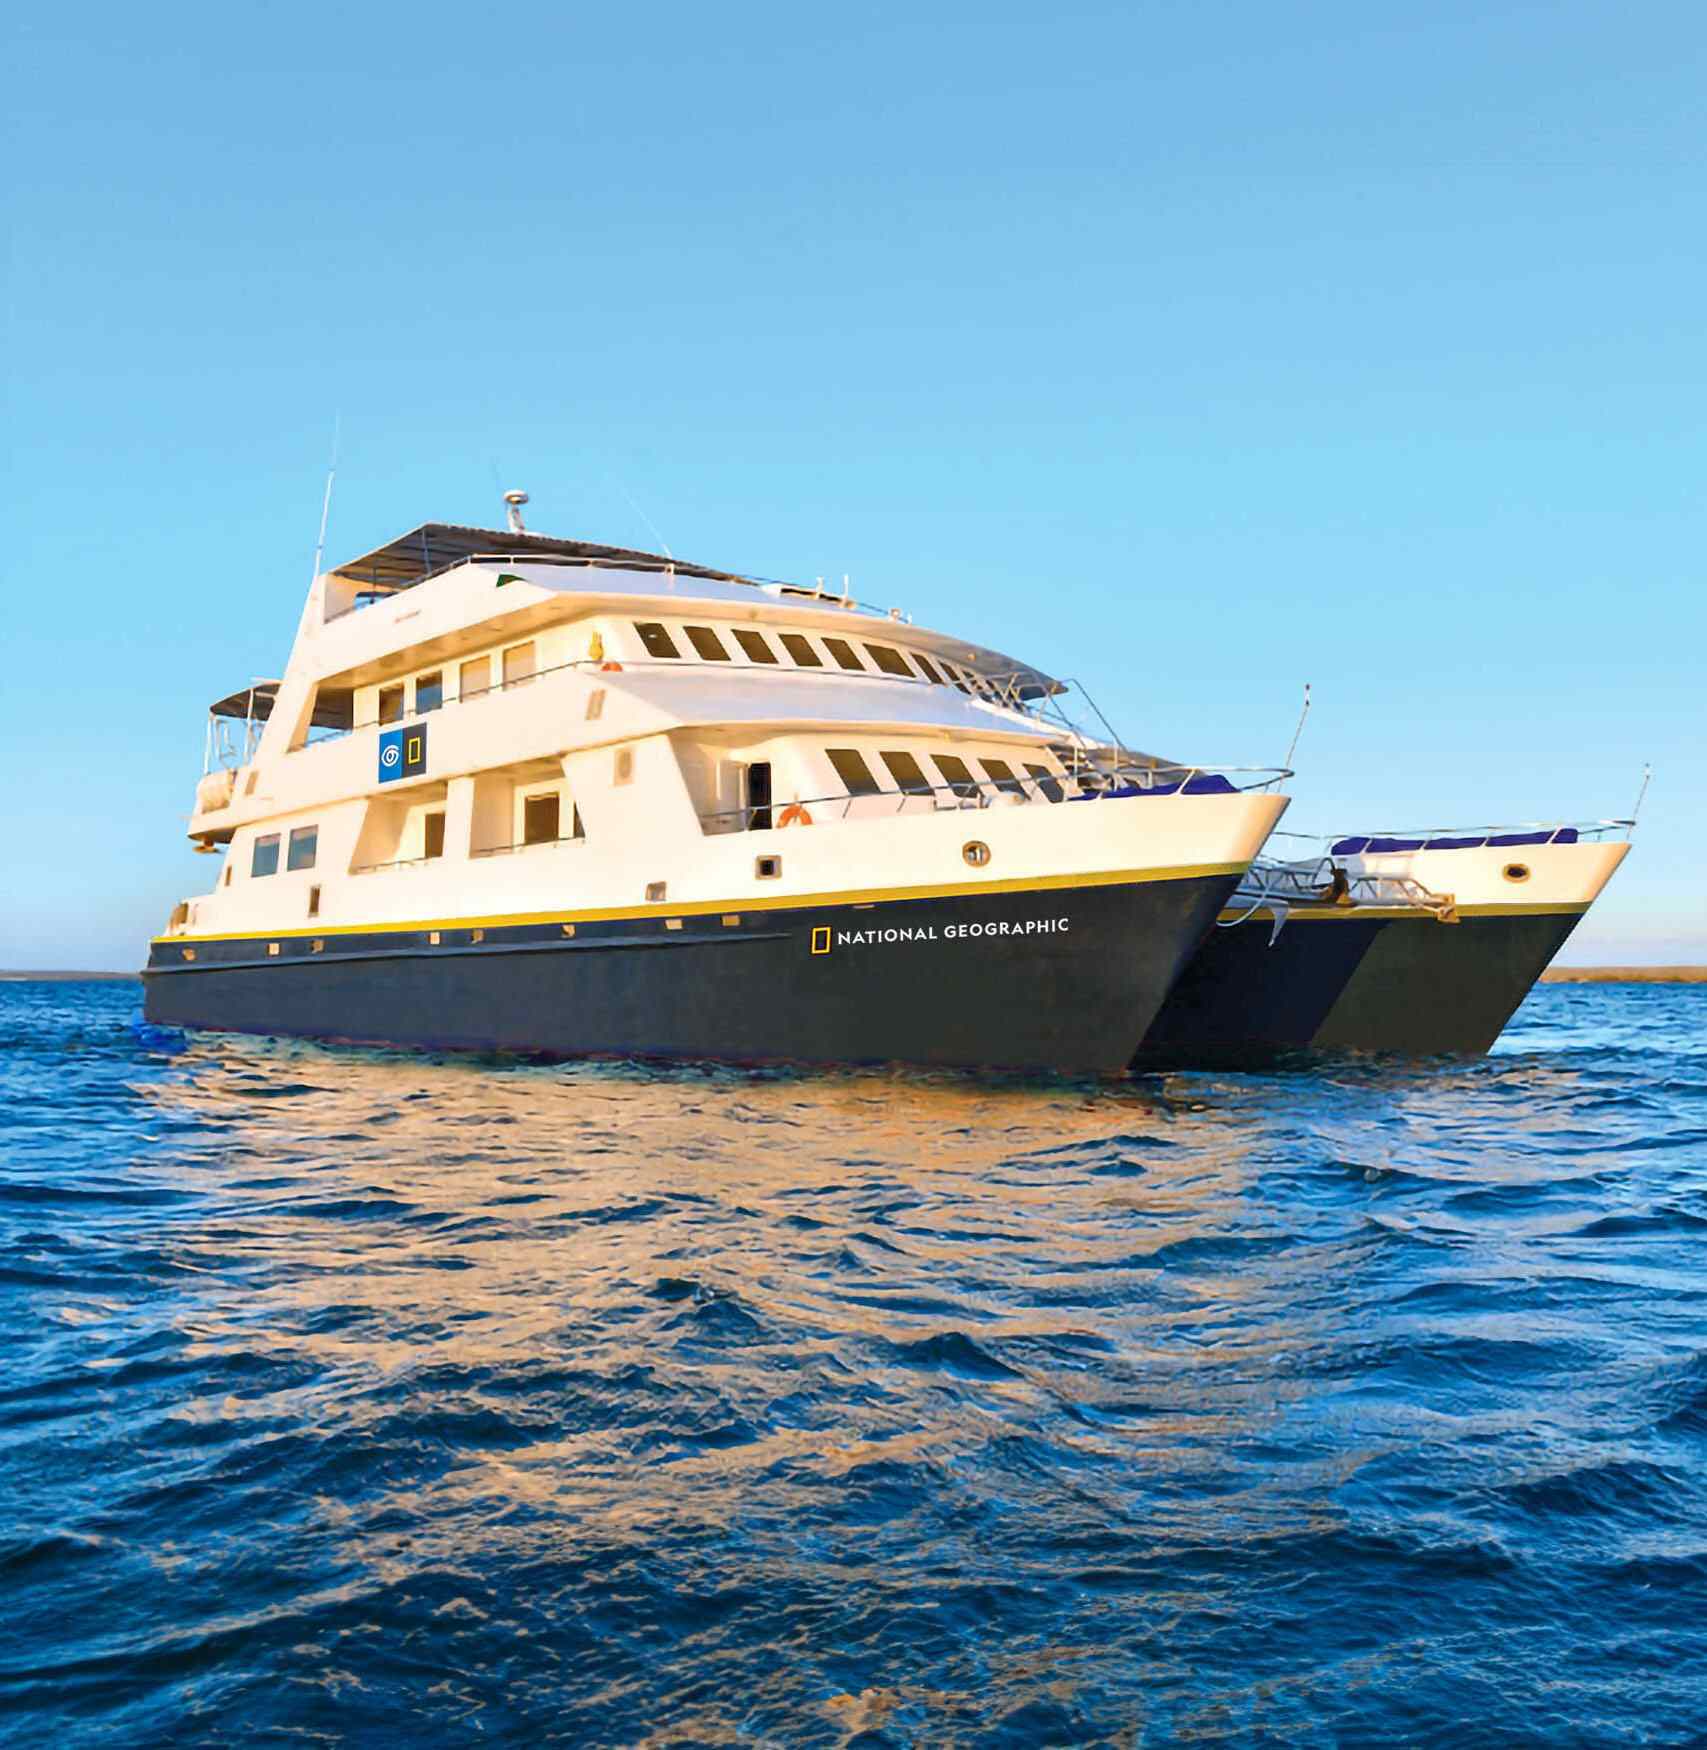 We are adding two new purpose-built ships to our fleet in the Gal&aacute;pagos. Open for booking now!